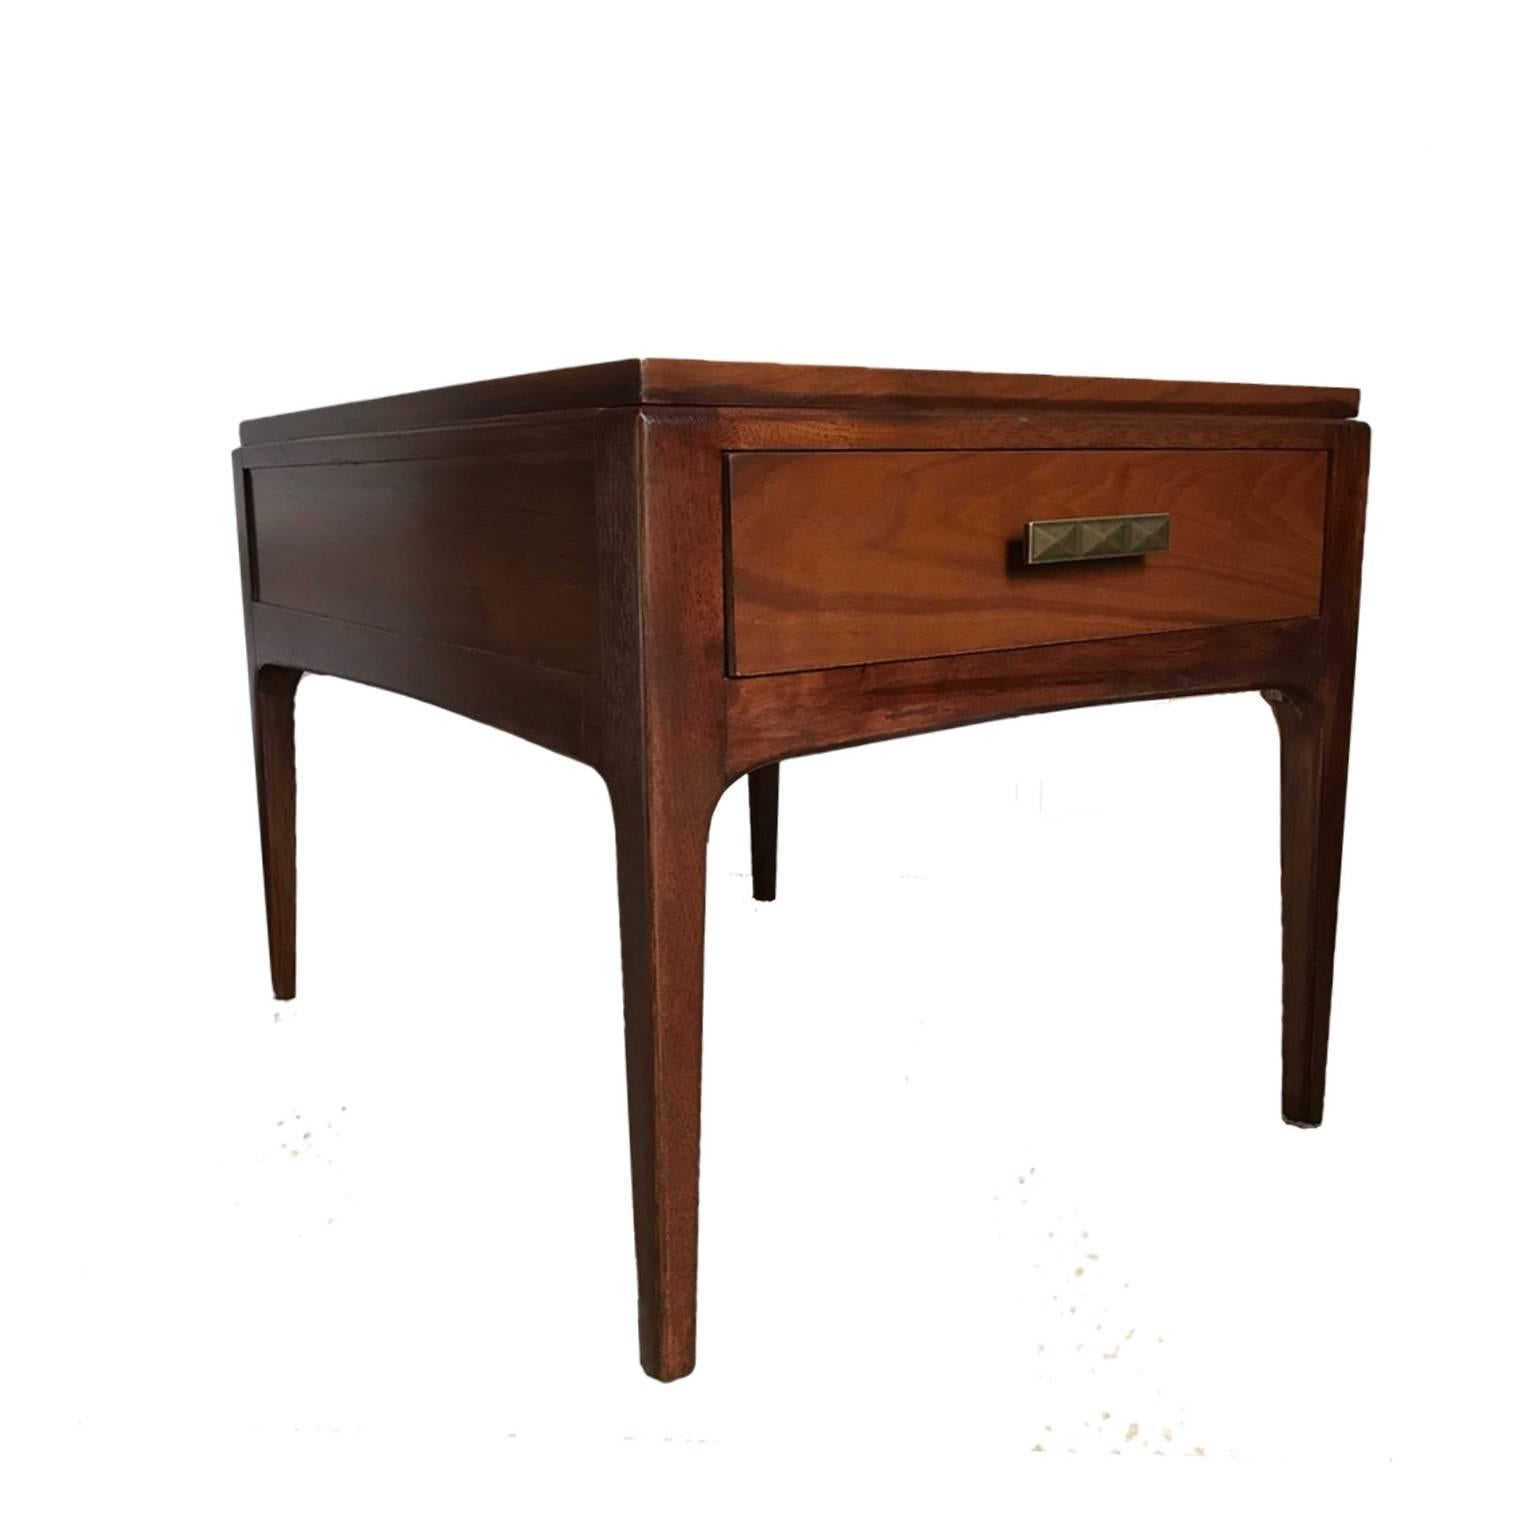 American Pair of Single Drawer Mid-Century Modern Walnut Nightstands or Bedside Tables